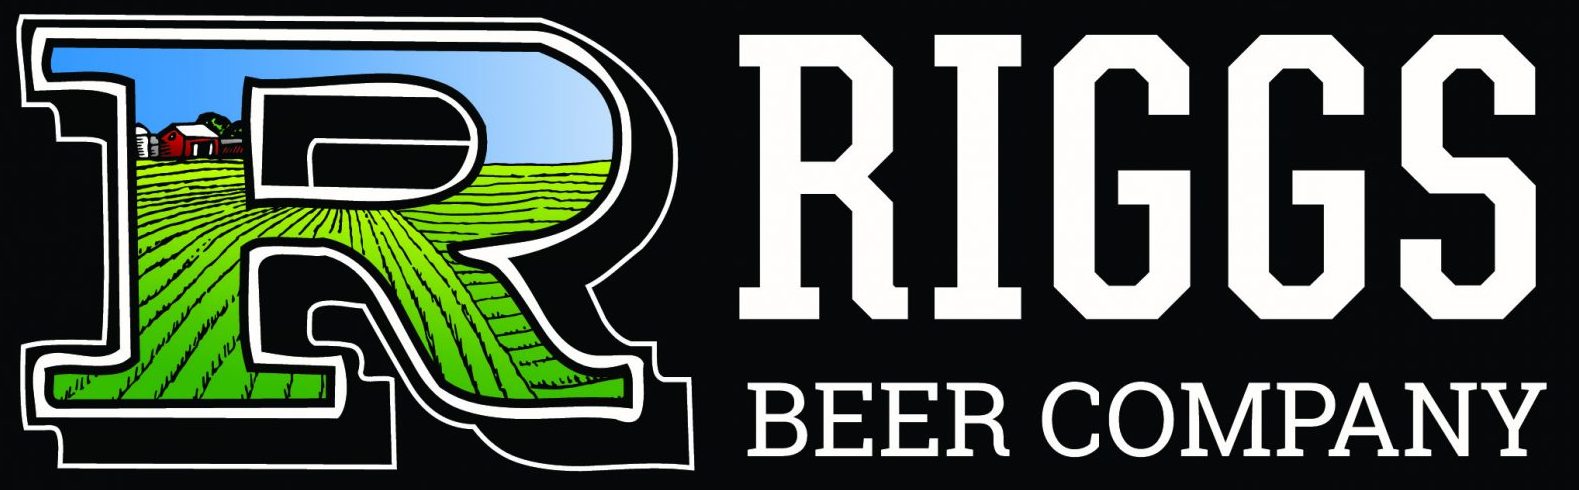 Riggs Beer Company